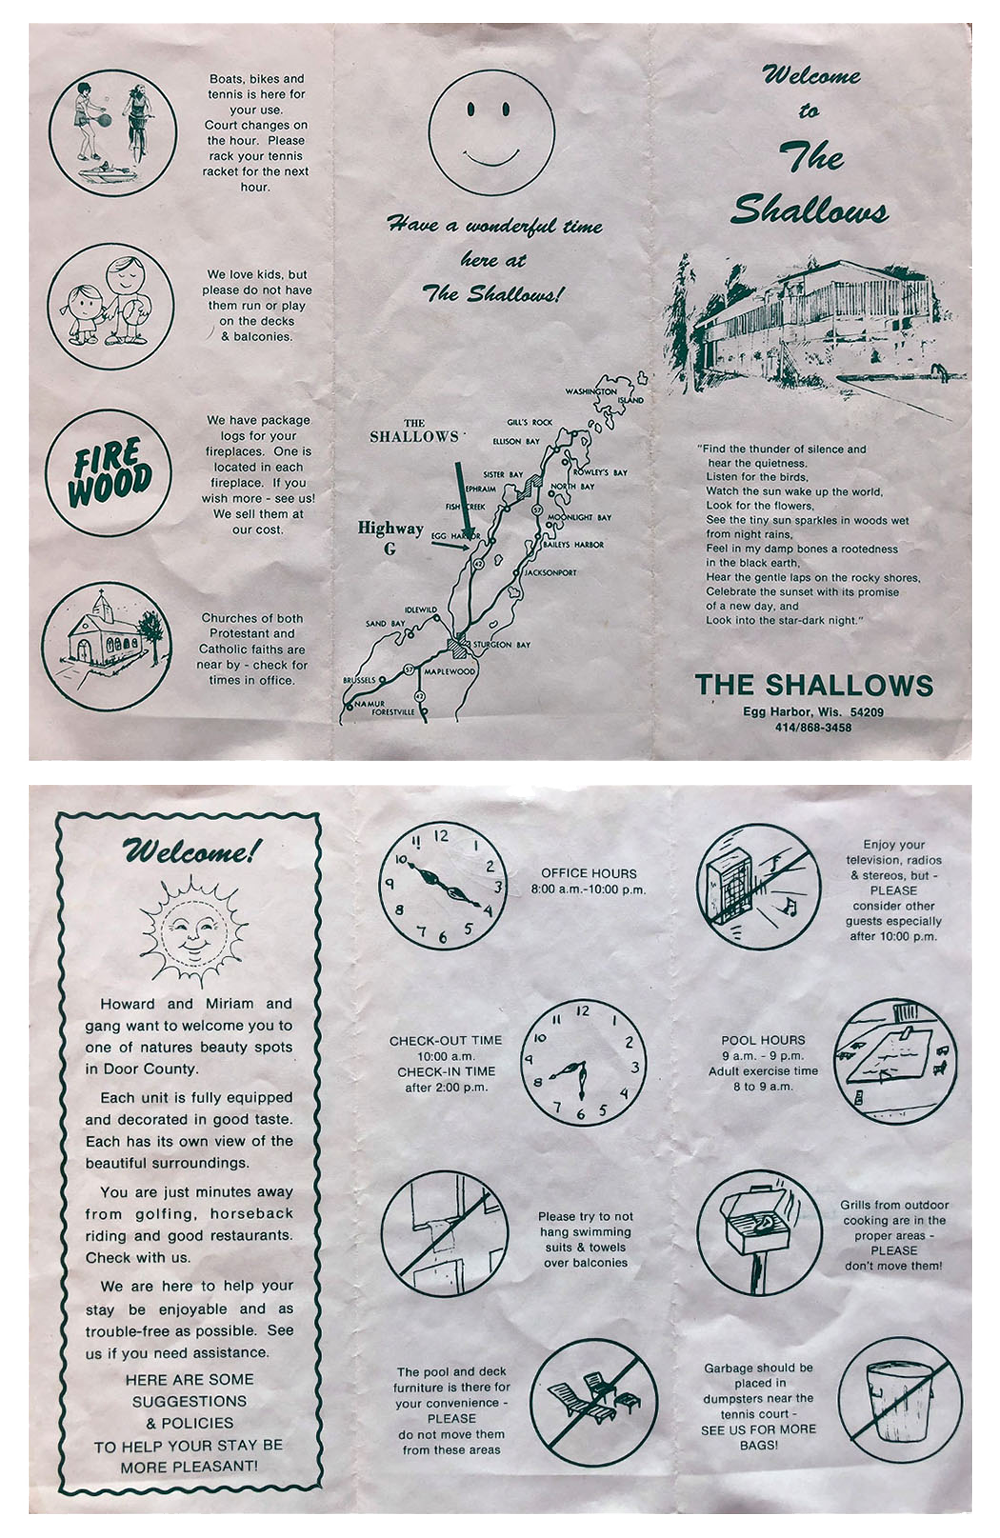 Front and back images of an old Shallows Resort brochure